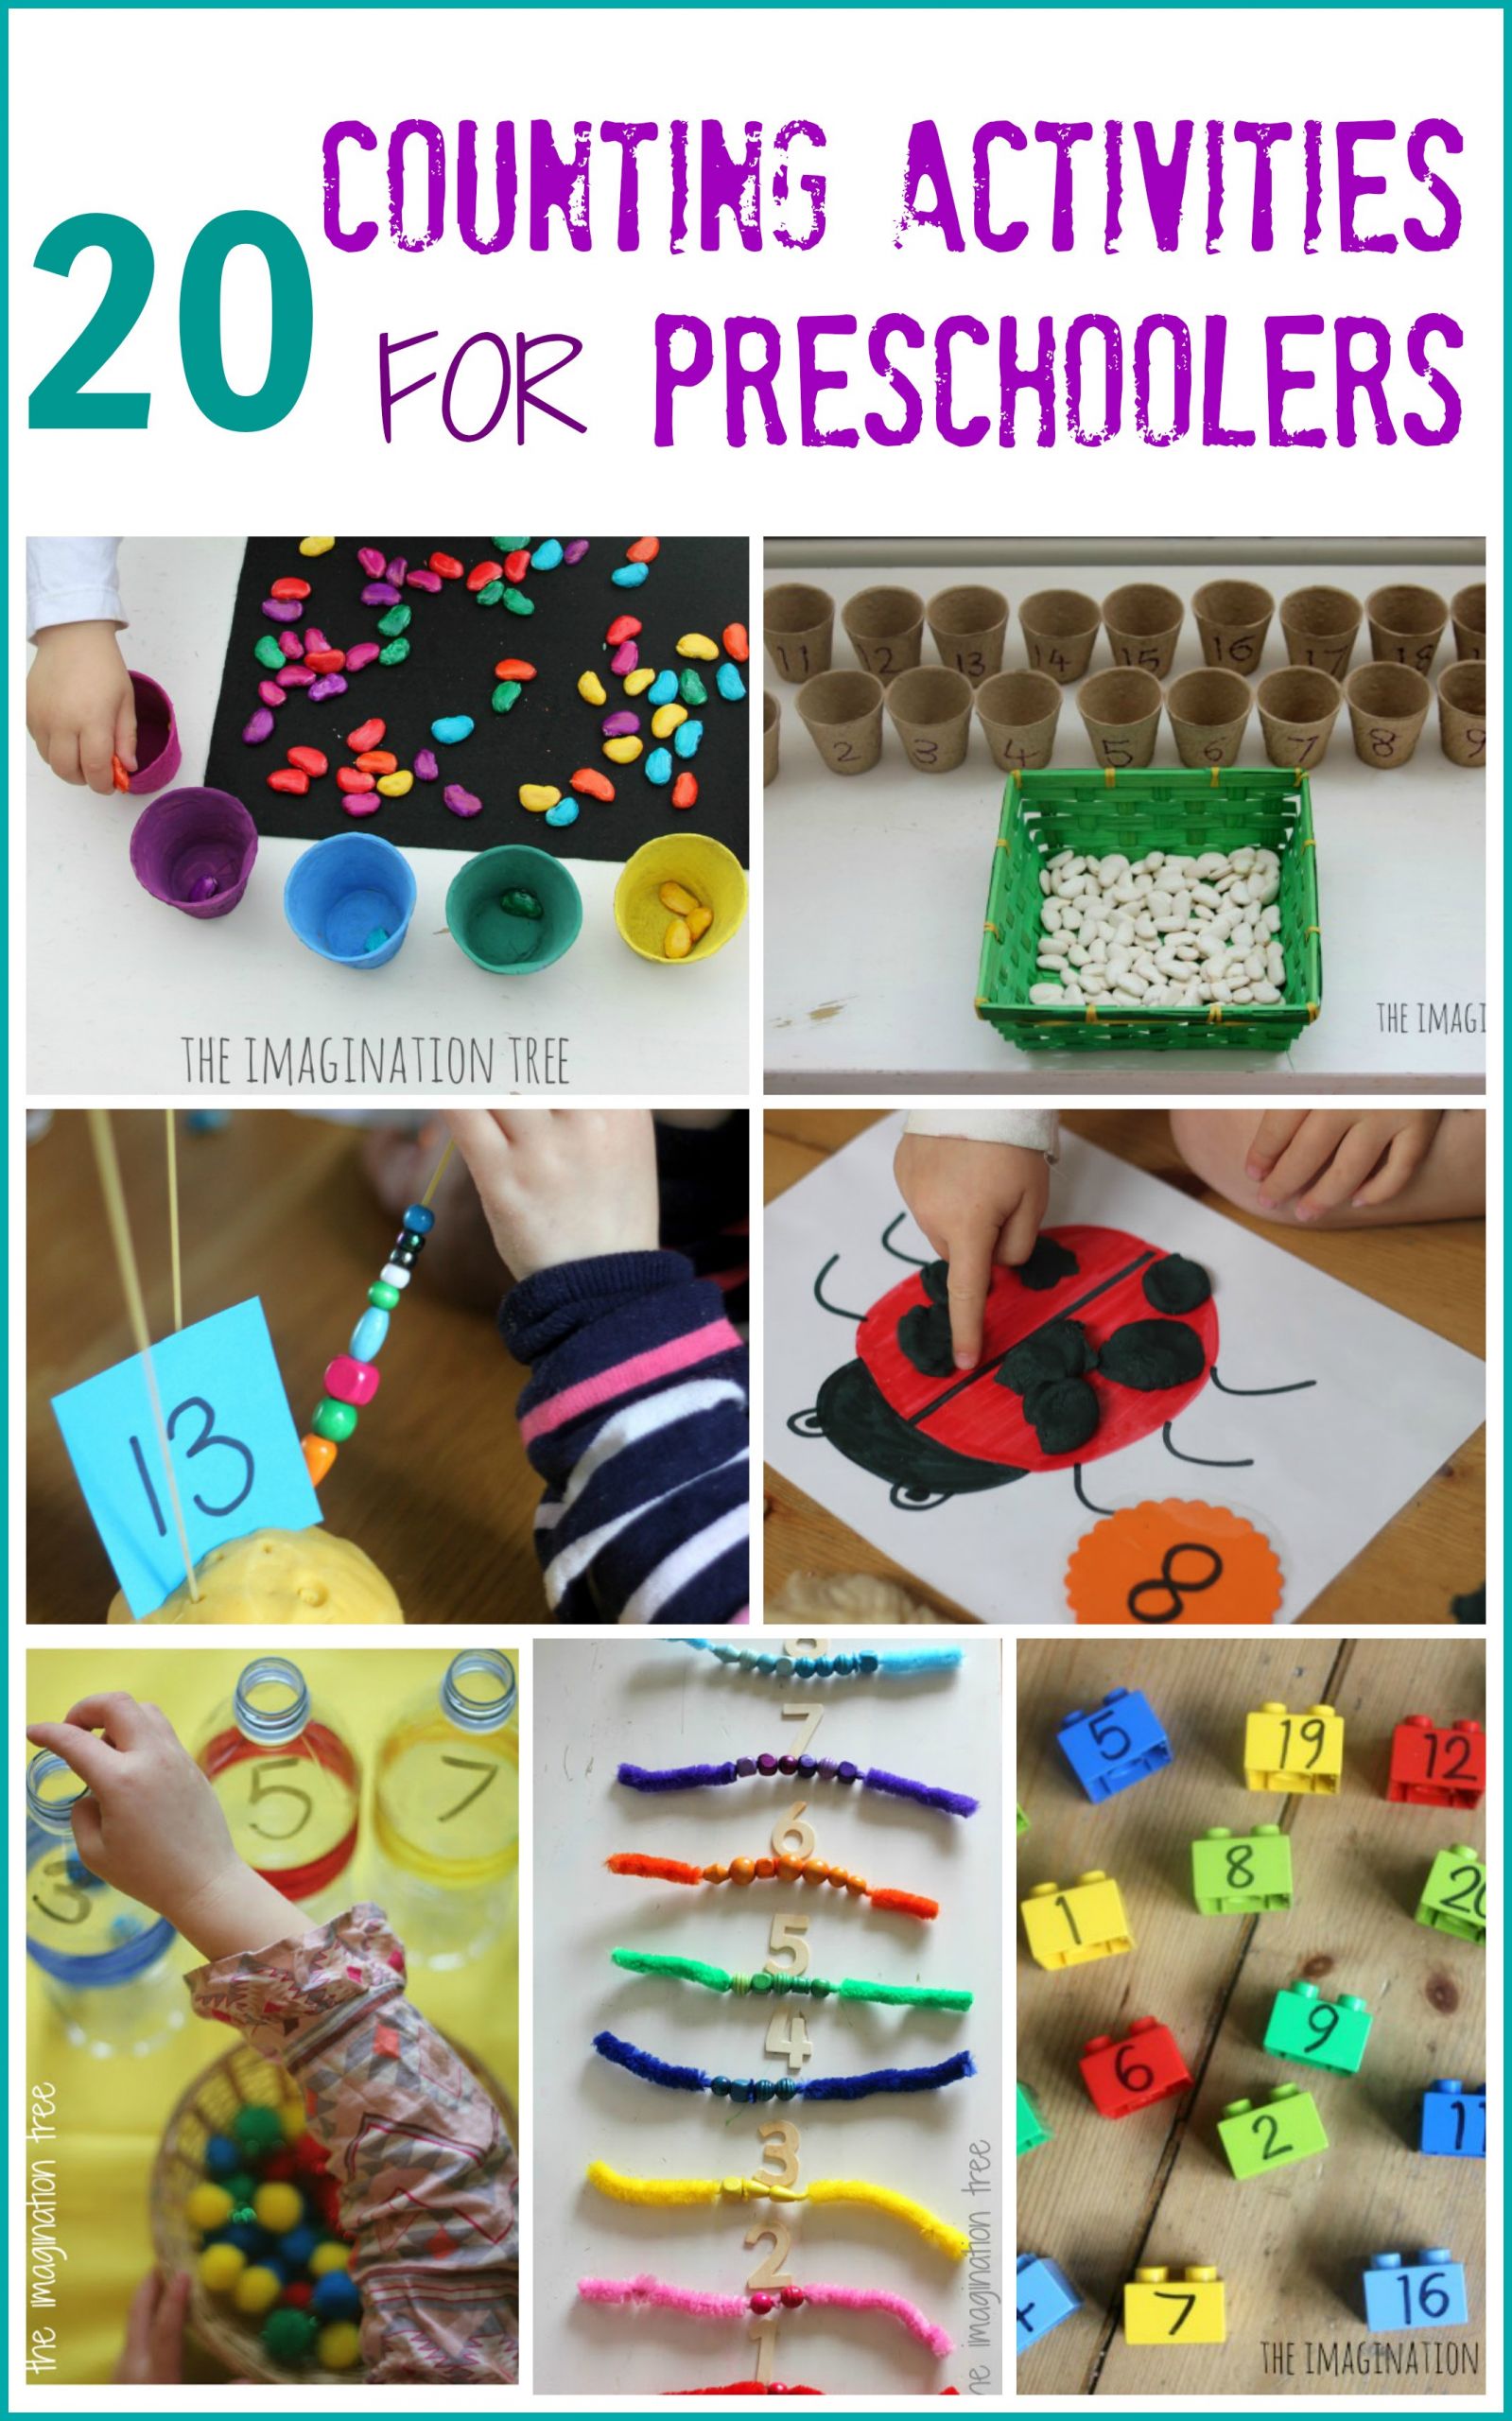 Learning Crafts For Preschoolers
 20 Counting Activities for Preschoolers The Imagination Tree